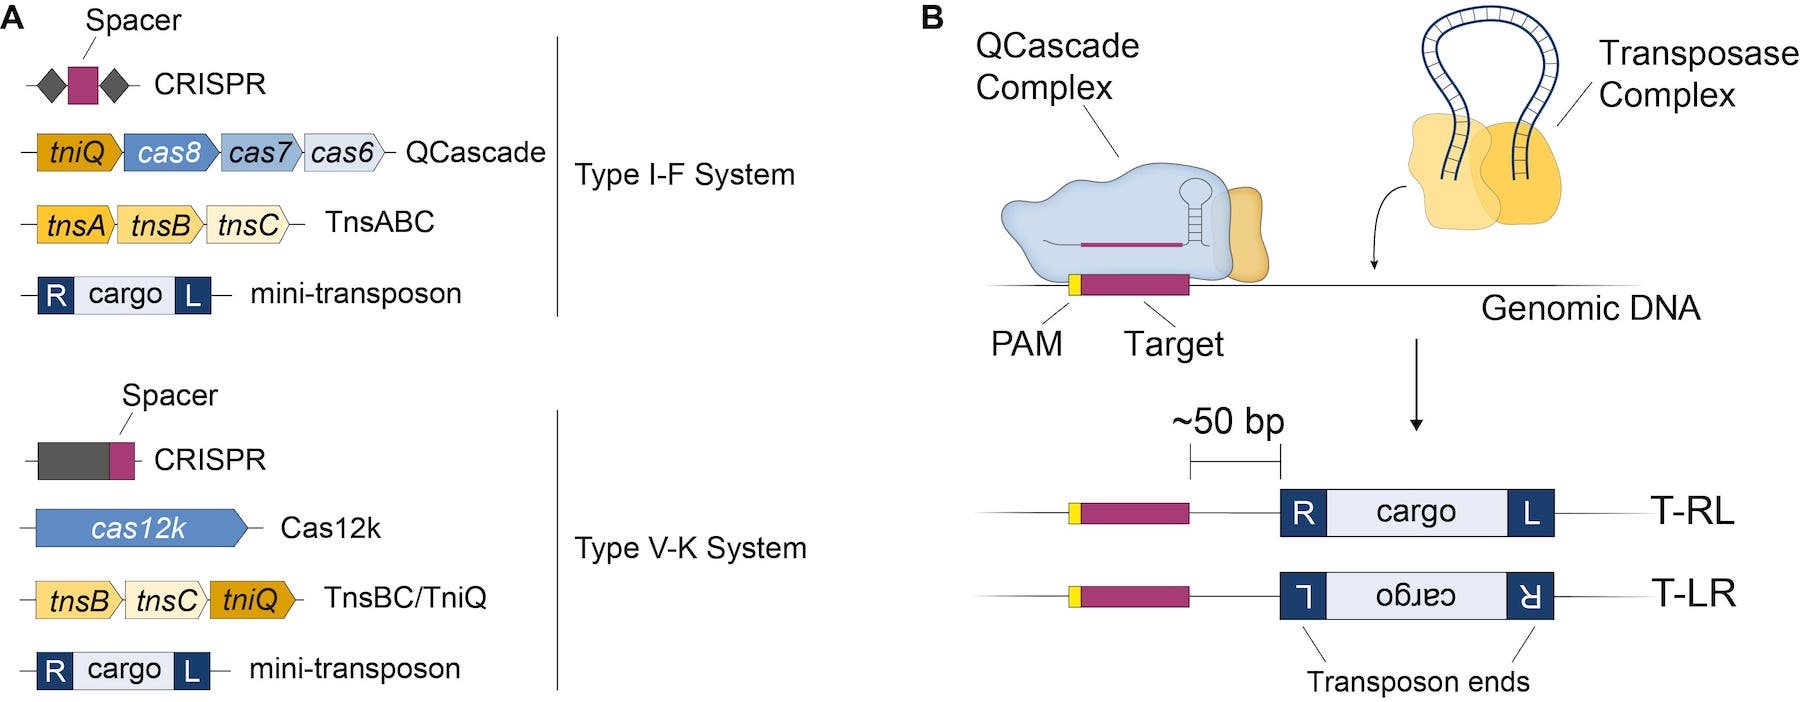 Left: components of the Type I-F system and Type V-K system. Right: The QCascade complex targets the target site while the transposase complex brings the donor DNA.